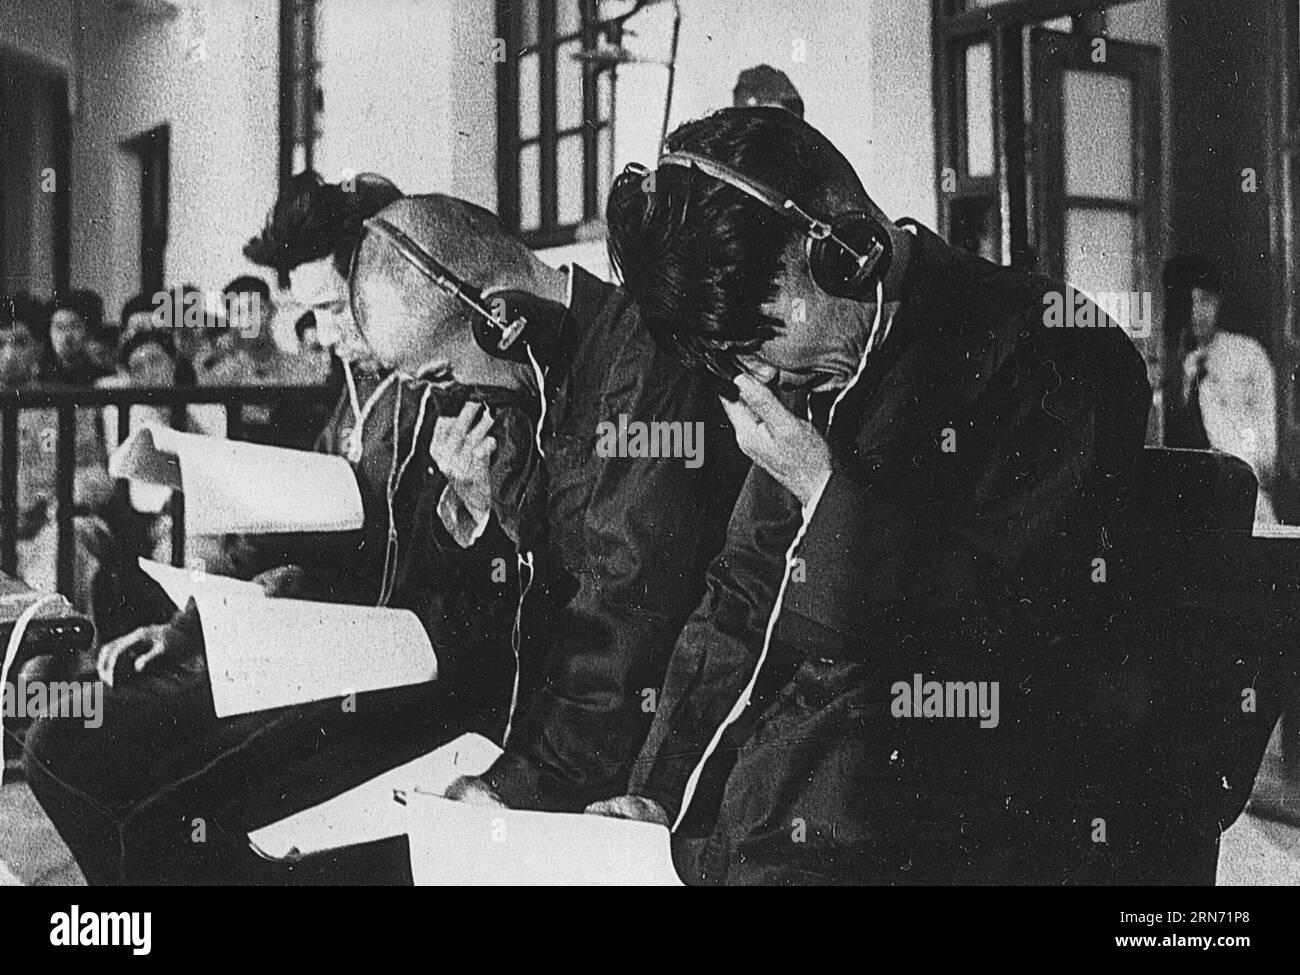 (150813) -- BEIJING, Aug. 13, 2015 () -- File photo taken in 1956 shows Japanese war criminals being tried at a special military court in Taiyuan, north China s Shanxi Province. On Aug. 15, 1945, Japanese Emperor Hirohito delivered a recorded radio address to the nation, announcing the surrender of Japan in World War II, one day after Japan declared its acceptance of the provisions of the Potsdam Proclamation jointly issued by China, the United States and Britain on July 26, 1945, with the Soviet Union joining later. The proclamation, which radicated Japan s crimes of aggressions during WWII a Stock Photo